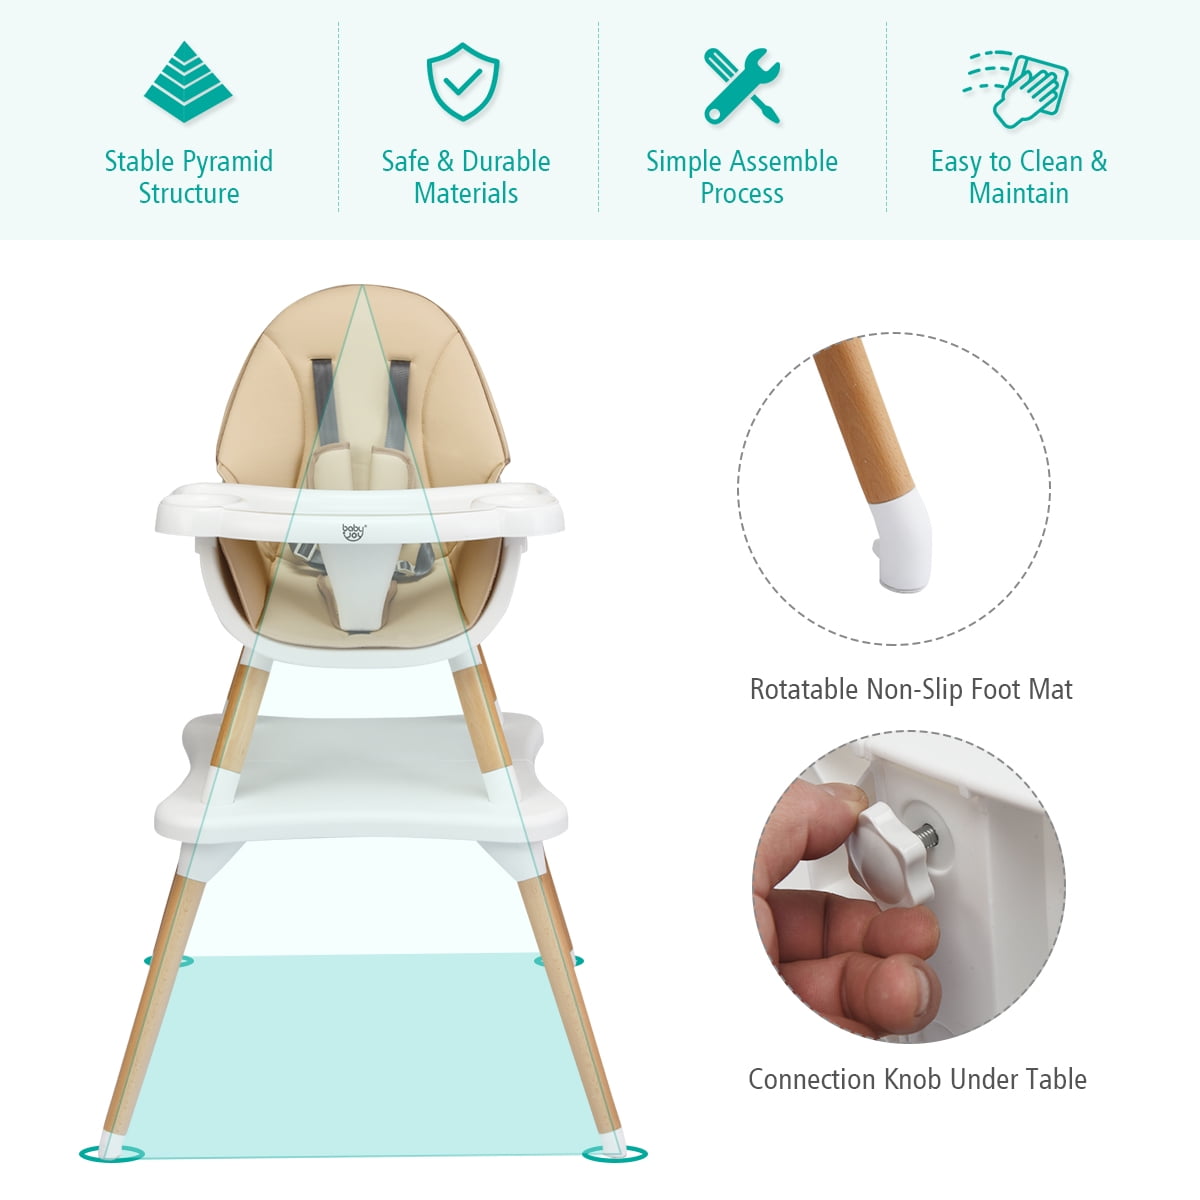 BABY JOY 5 in 1 High Chair Infant Wooden Highchair w/ 5-Point Harness Convertible High Chairs for Babies and Toddlers/Booster Seat/Table and Chair Set 4-Position Removable Tray & PU Cushion Coffee 